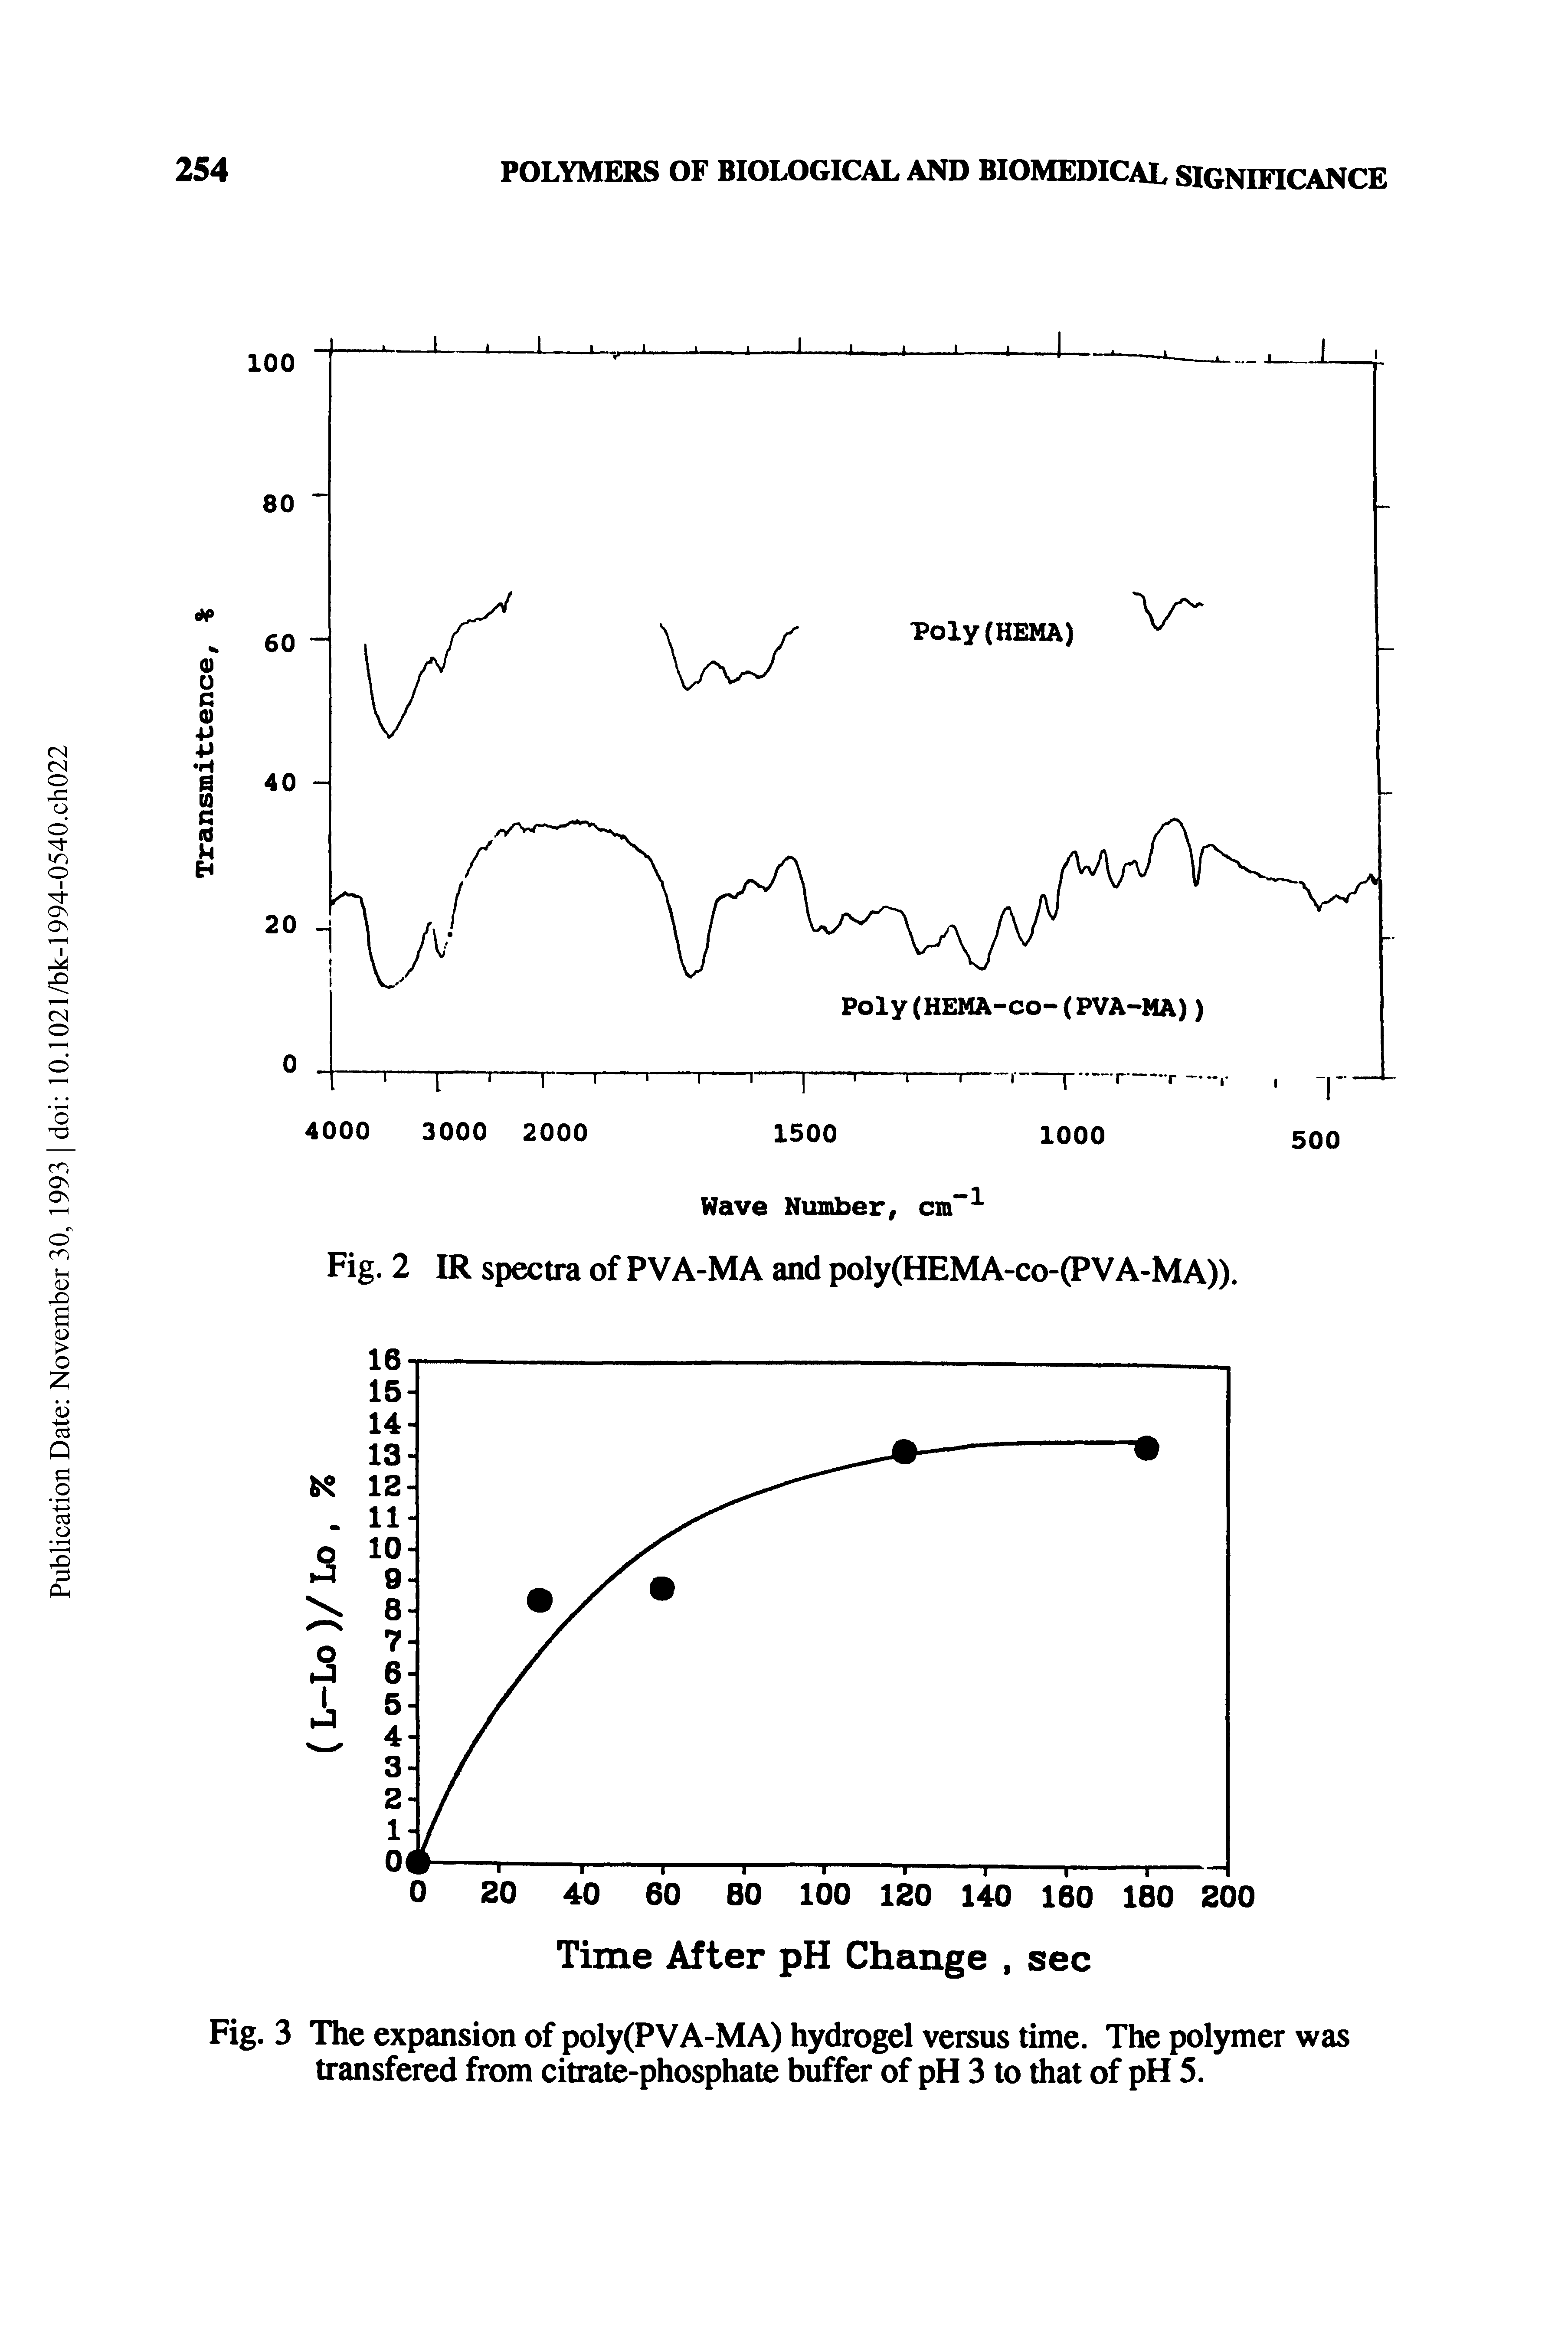 Fig. 3 The expansion of poly(PVA-MA) hydrogel versus time. The polymer was transfered from citrate-phosphate buffer of pH 3 to that of pH 5.